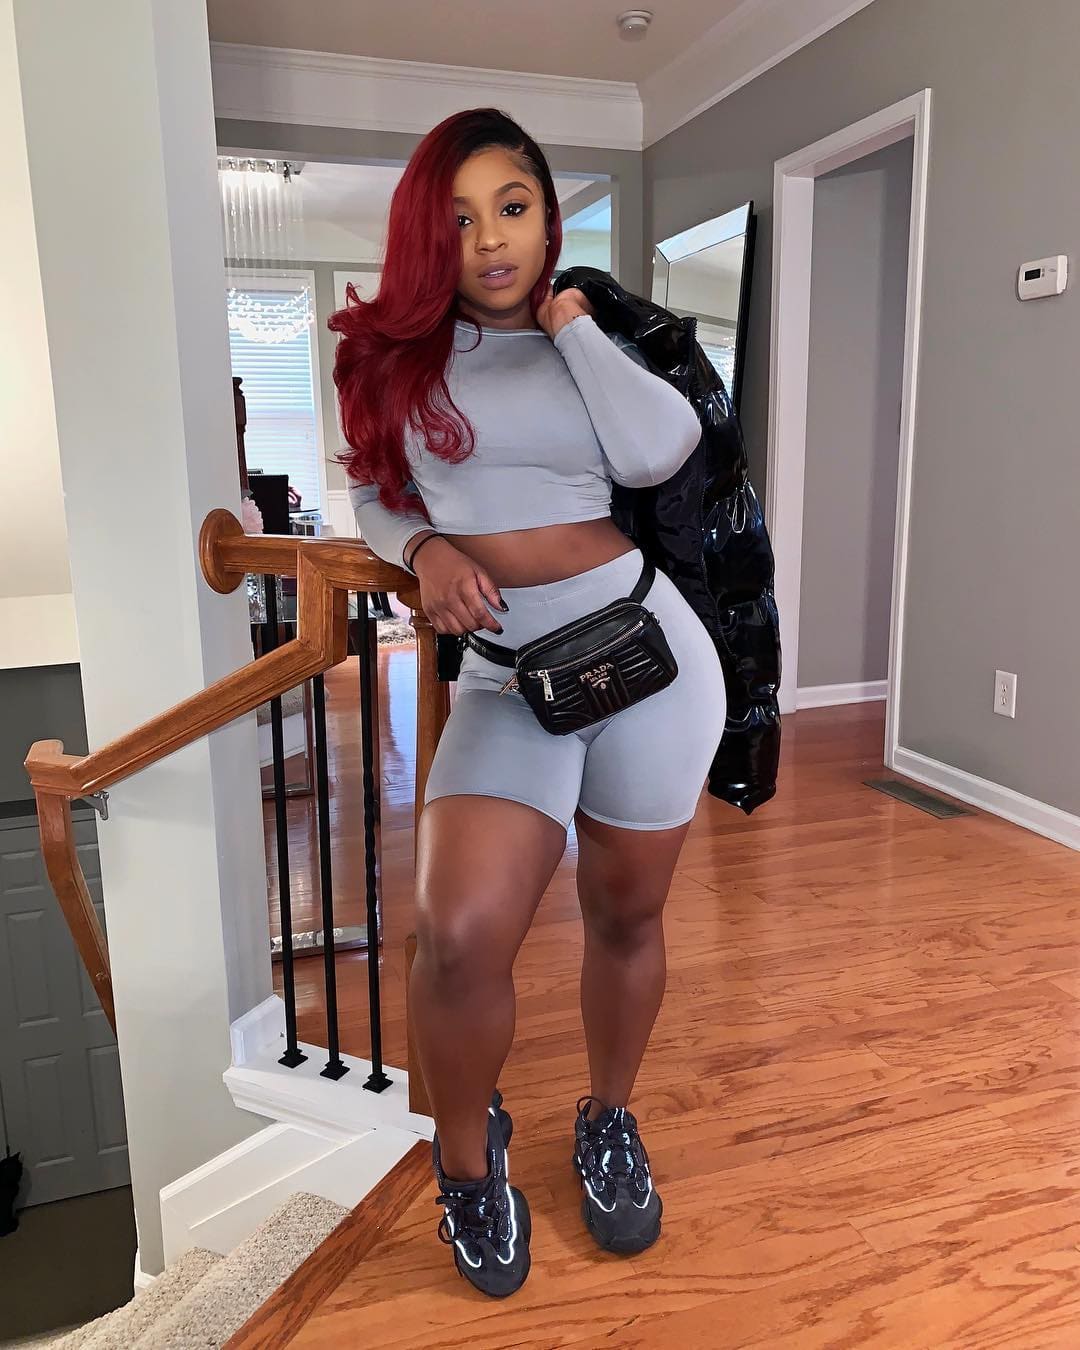 Reginae Carter Impresses Fans By Posing In White Lacy Lingerie - See Her Bomb Look Here!